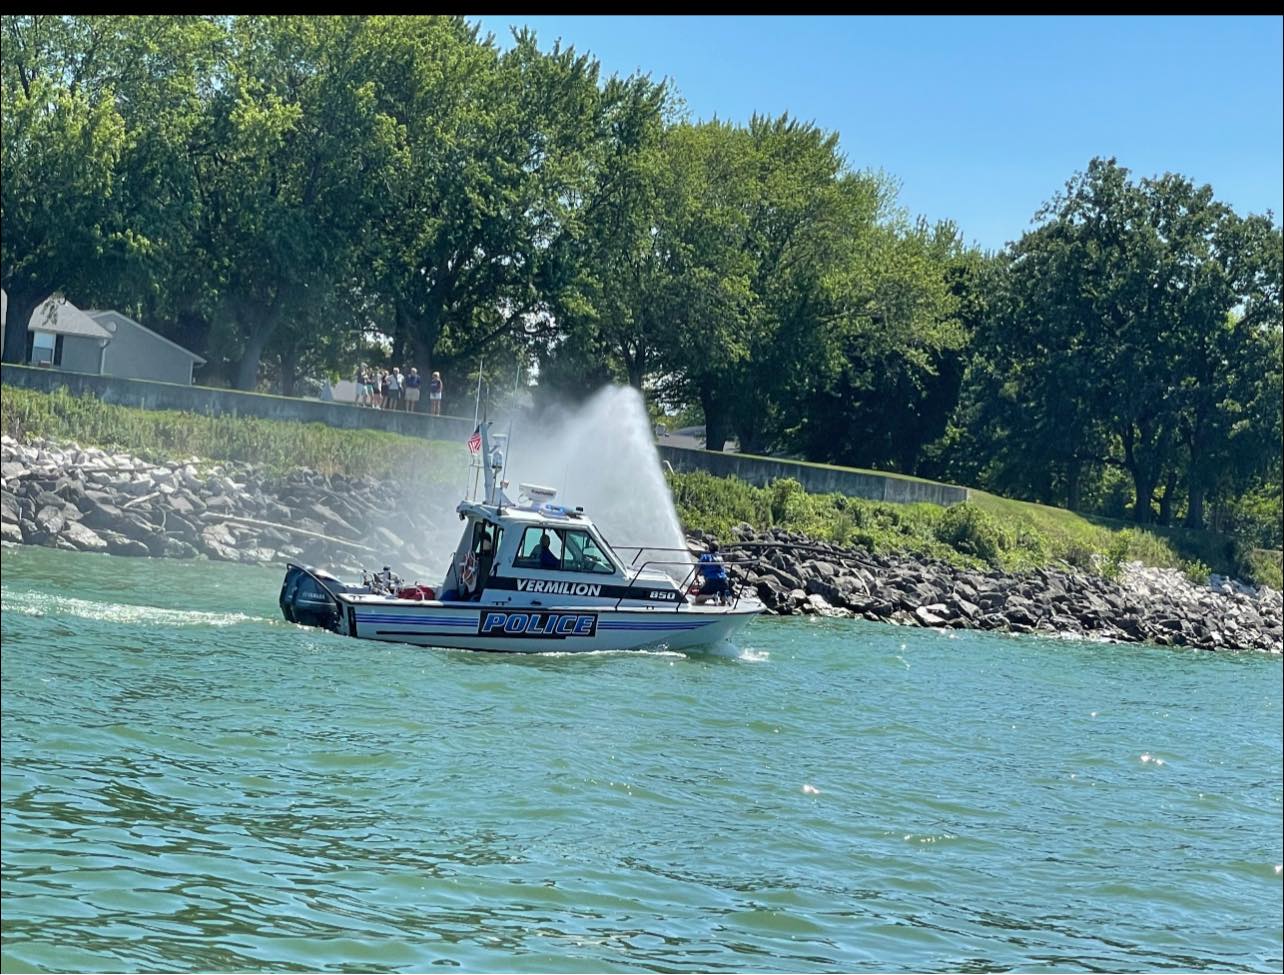 police boat spraying water onto shore as people watch